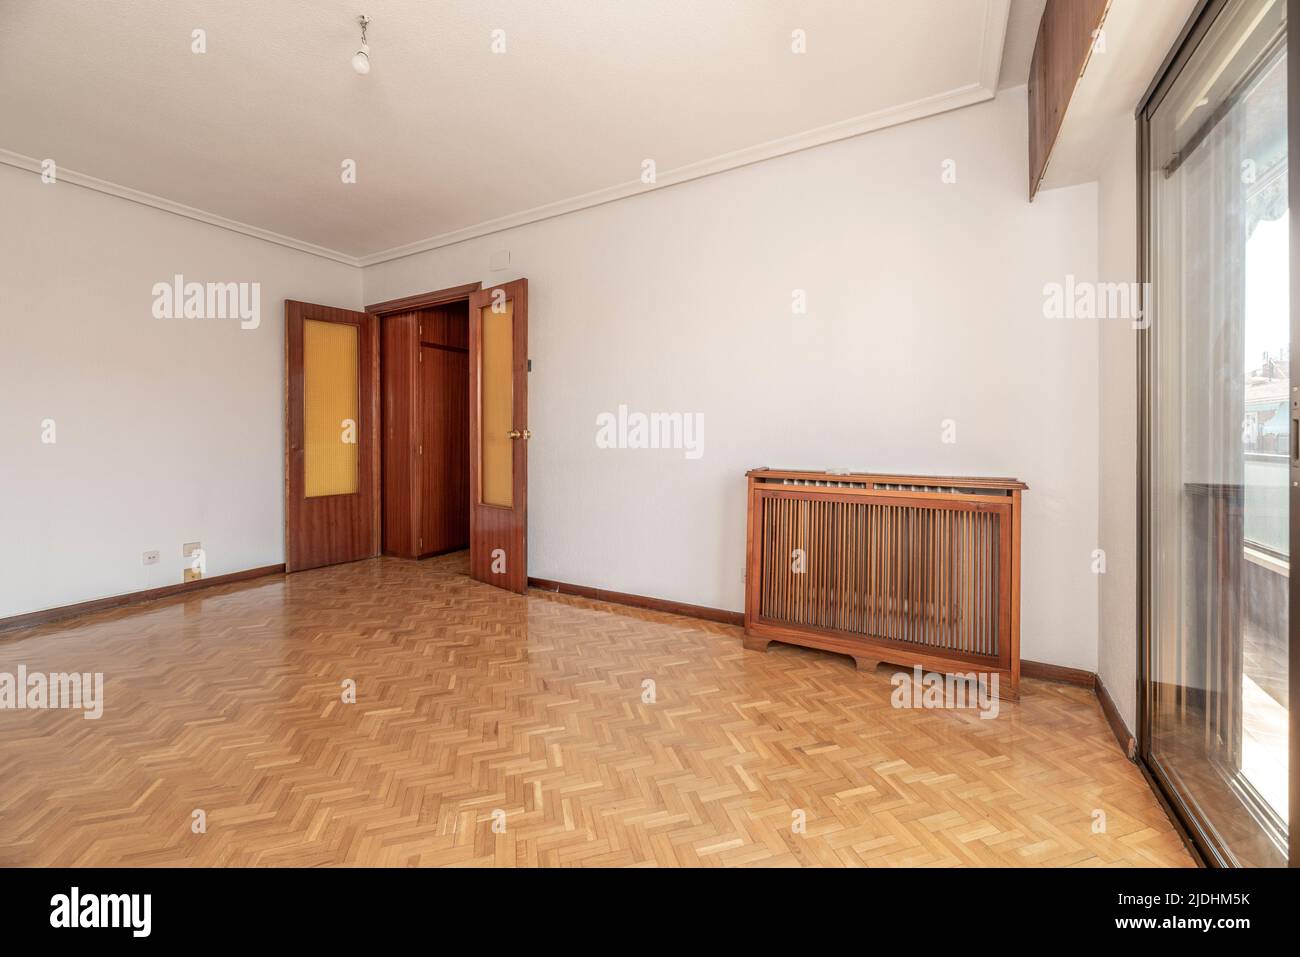 Empty living room with herringbone oak parquet floor, wooden radiator cover, white painted walls and brown aluminum joinery Stock Photo